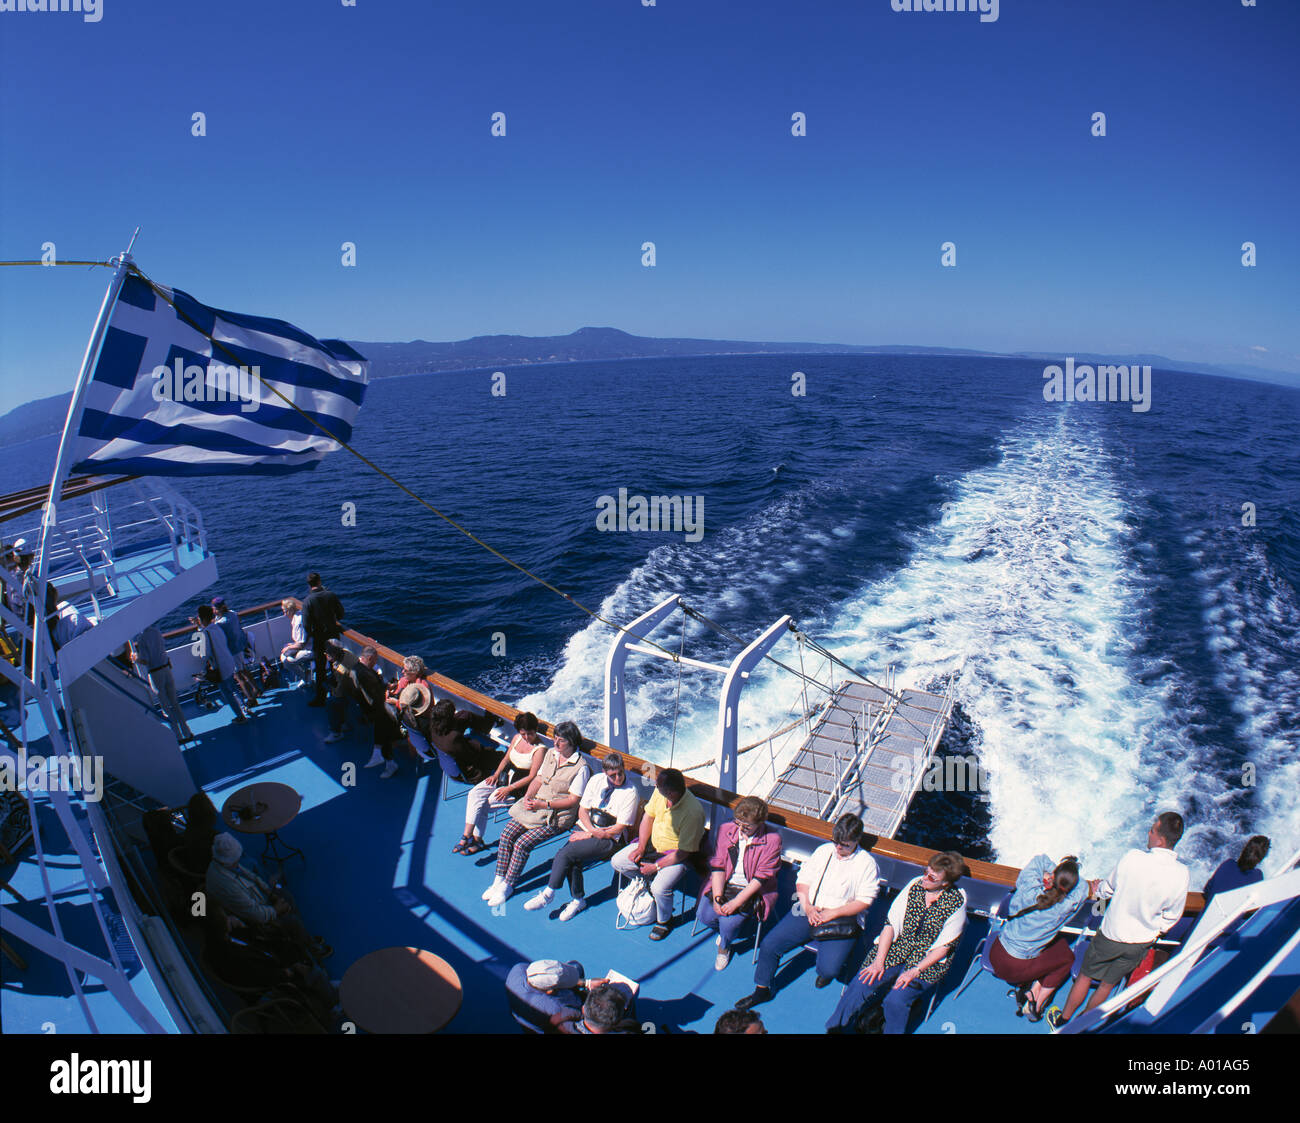 excursion ship, Greek flag, tourists, water tossed up by a ship, foaming sea, Aegean Sea Stock Photo